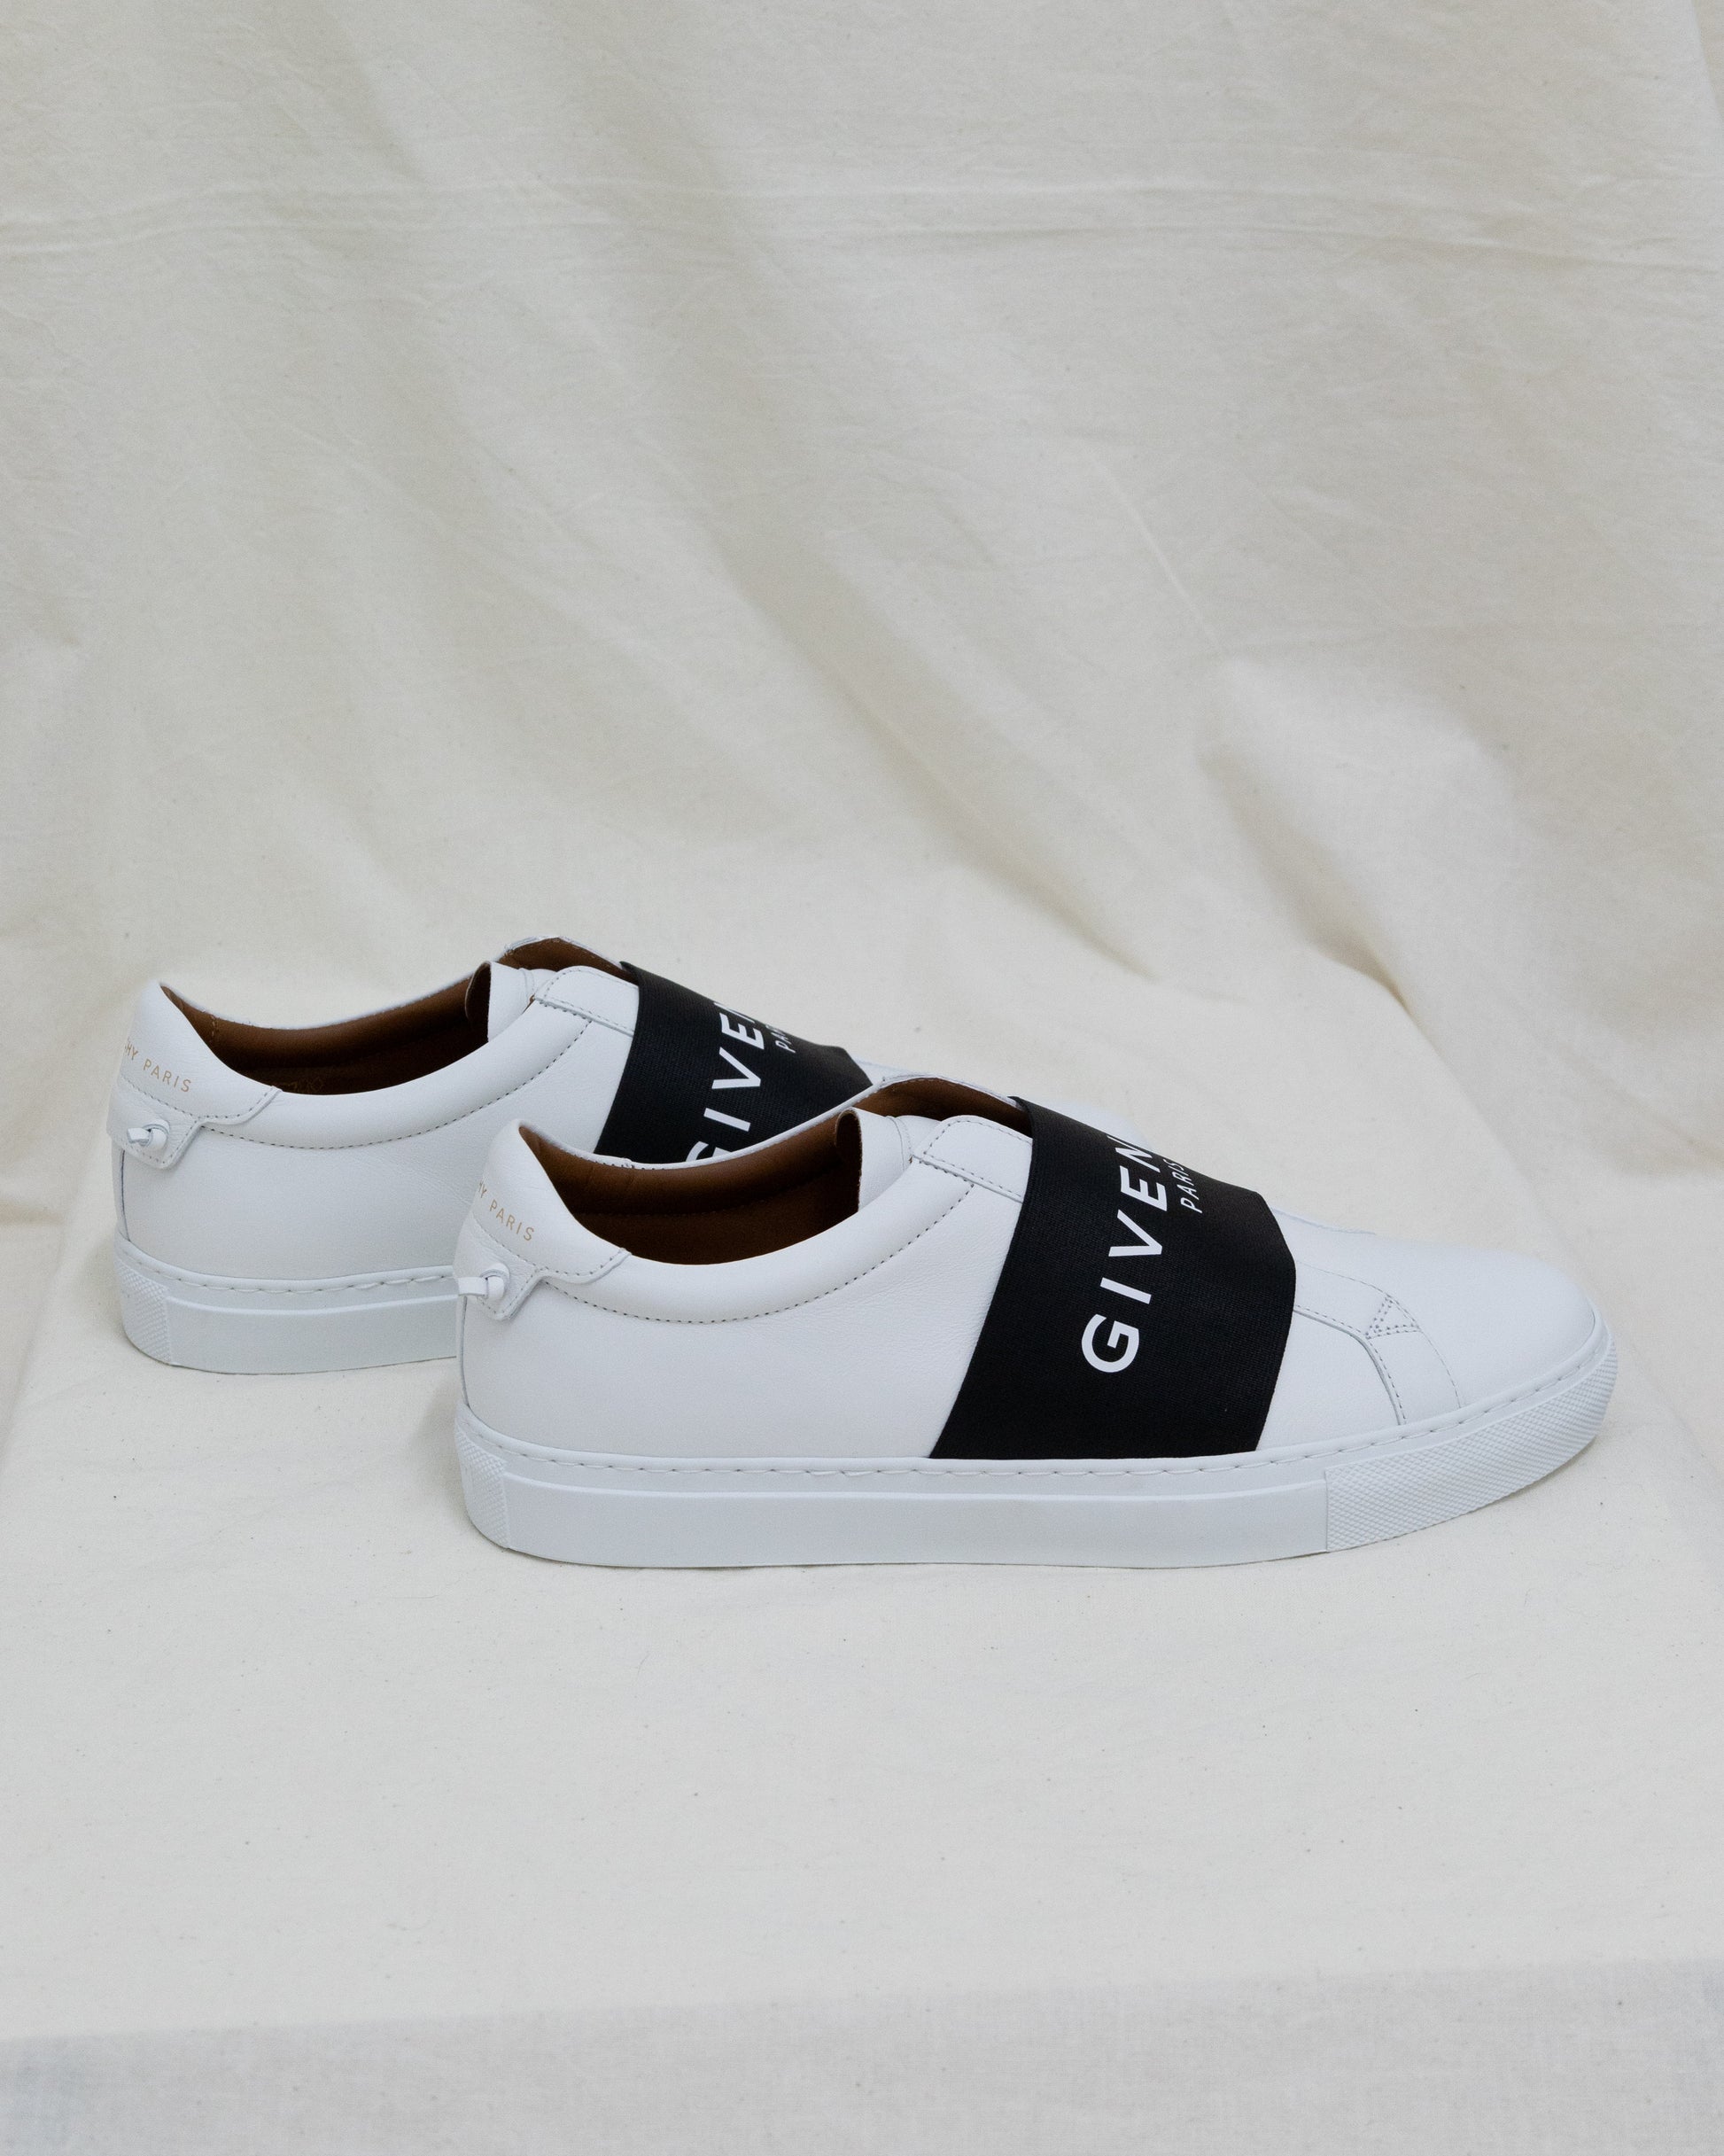 GIVENCHY Urban Sneakers 40 - THE VOG CLOSET